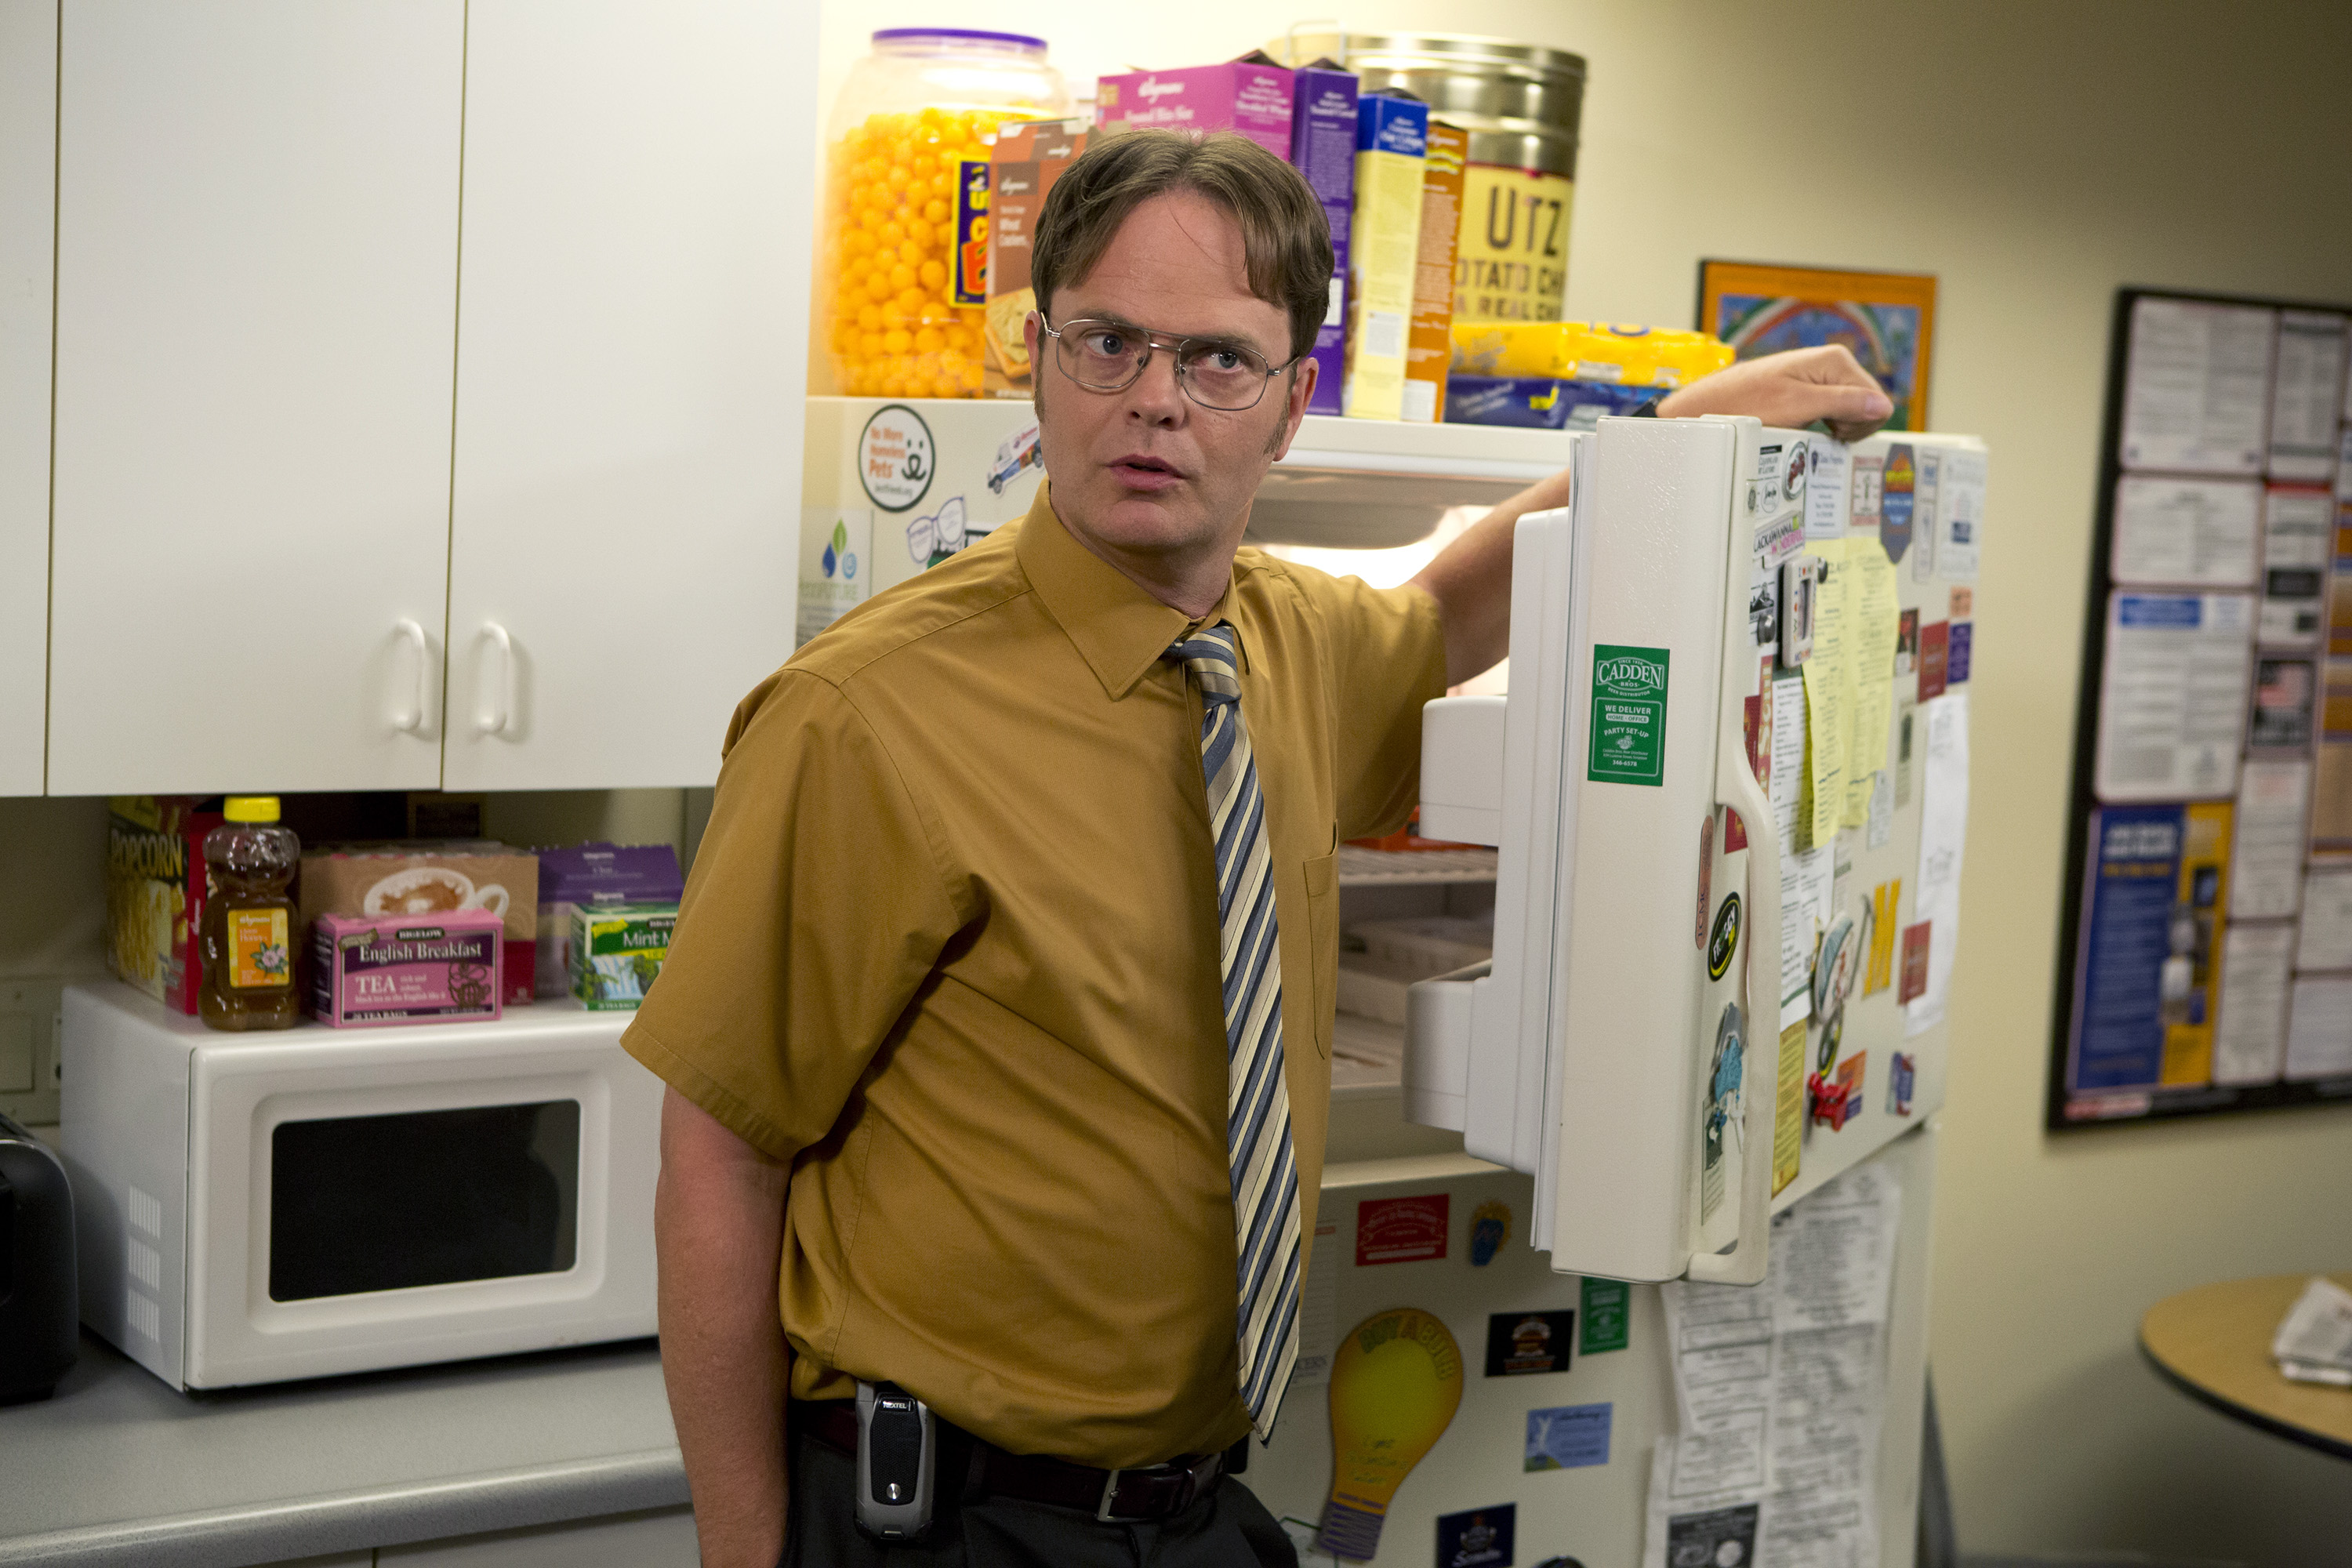 Rainn Wilson as Dwight Schrute in the 'Workplace Bullying' episode of 'The Office'